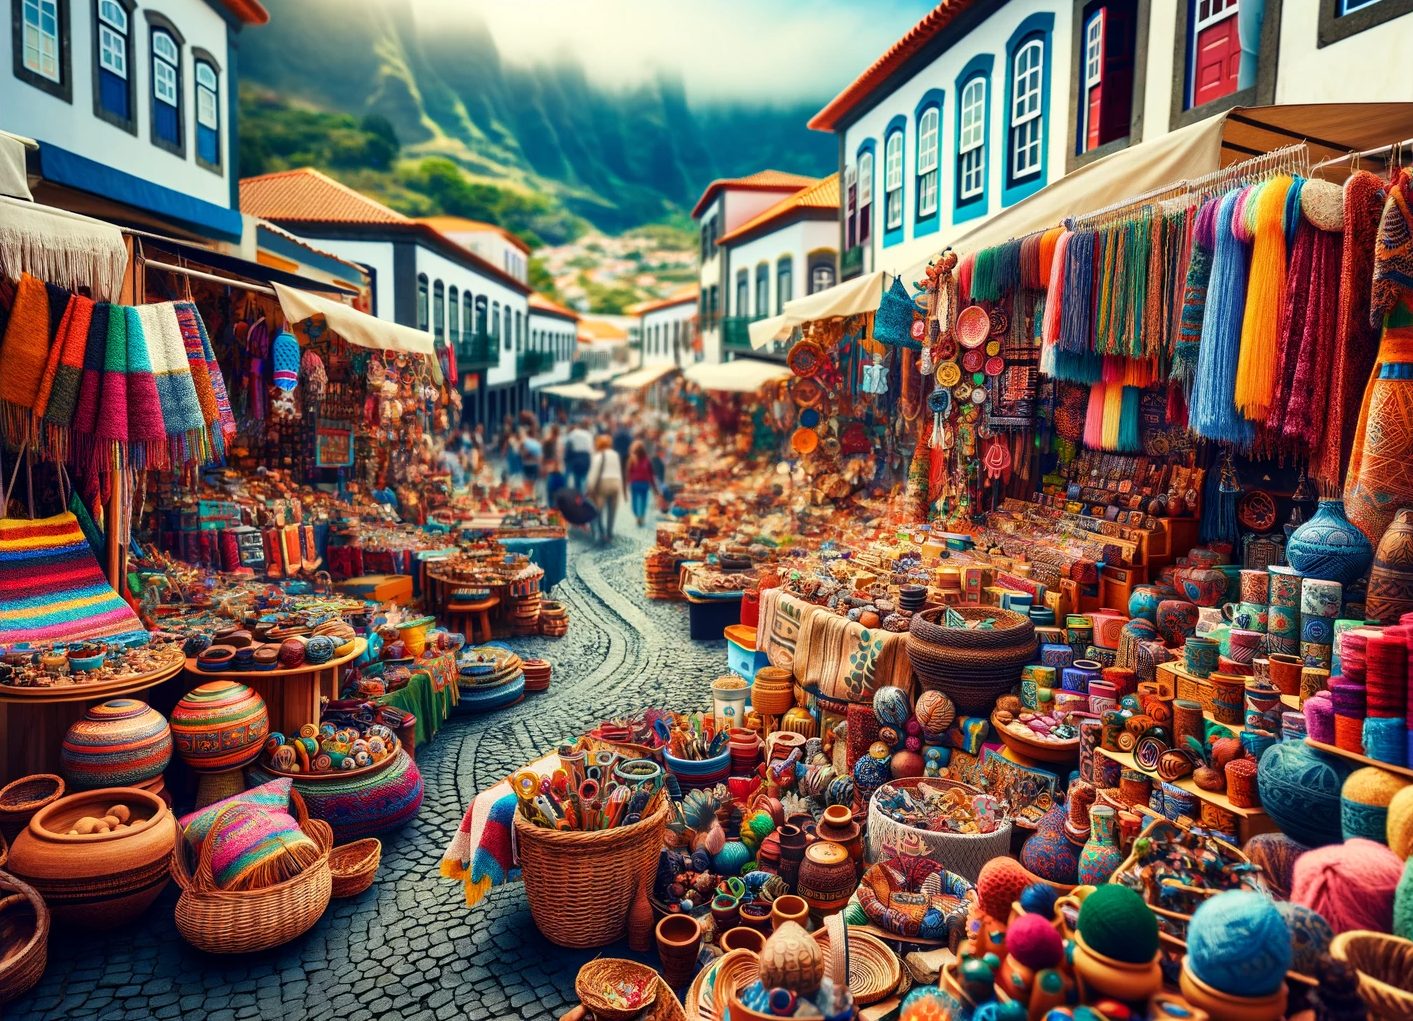 Colorful outdoor market street with handicrafts and textiles.